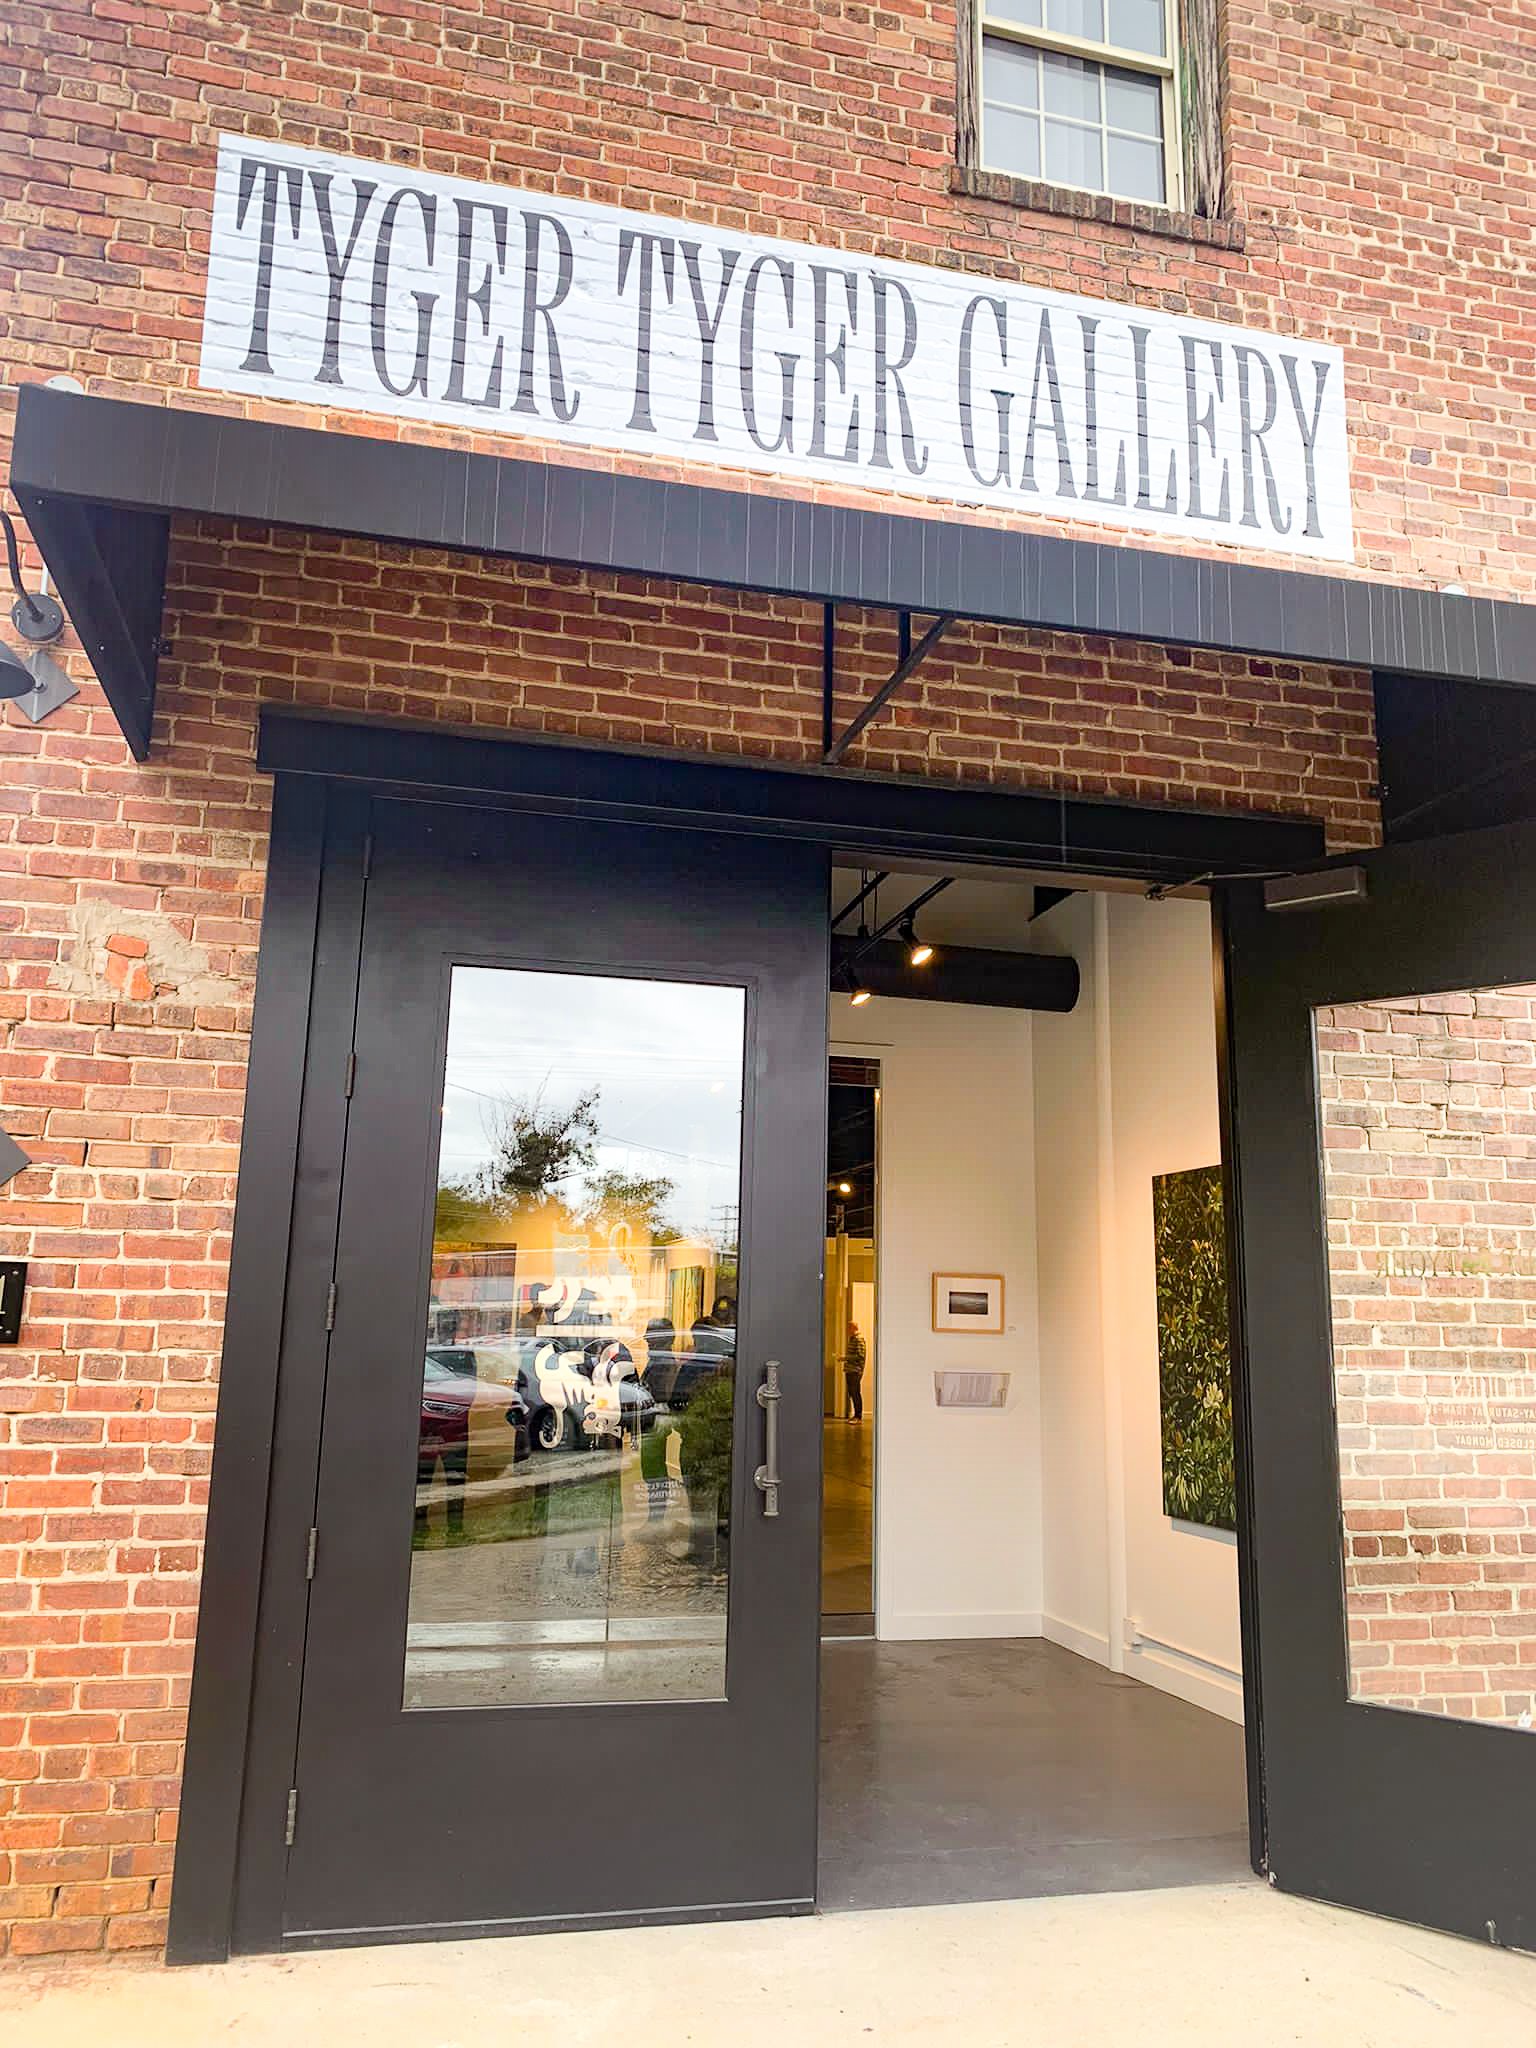  The Sun Touches Everything was a group exhibition curated by Danielle Winger at Tyger Tyger Gallery in Asheville, NC. 